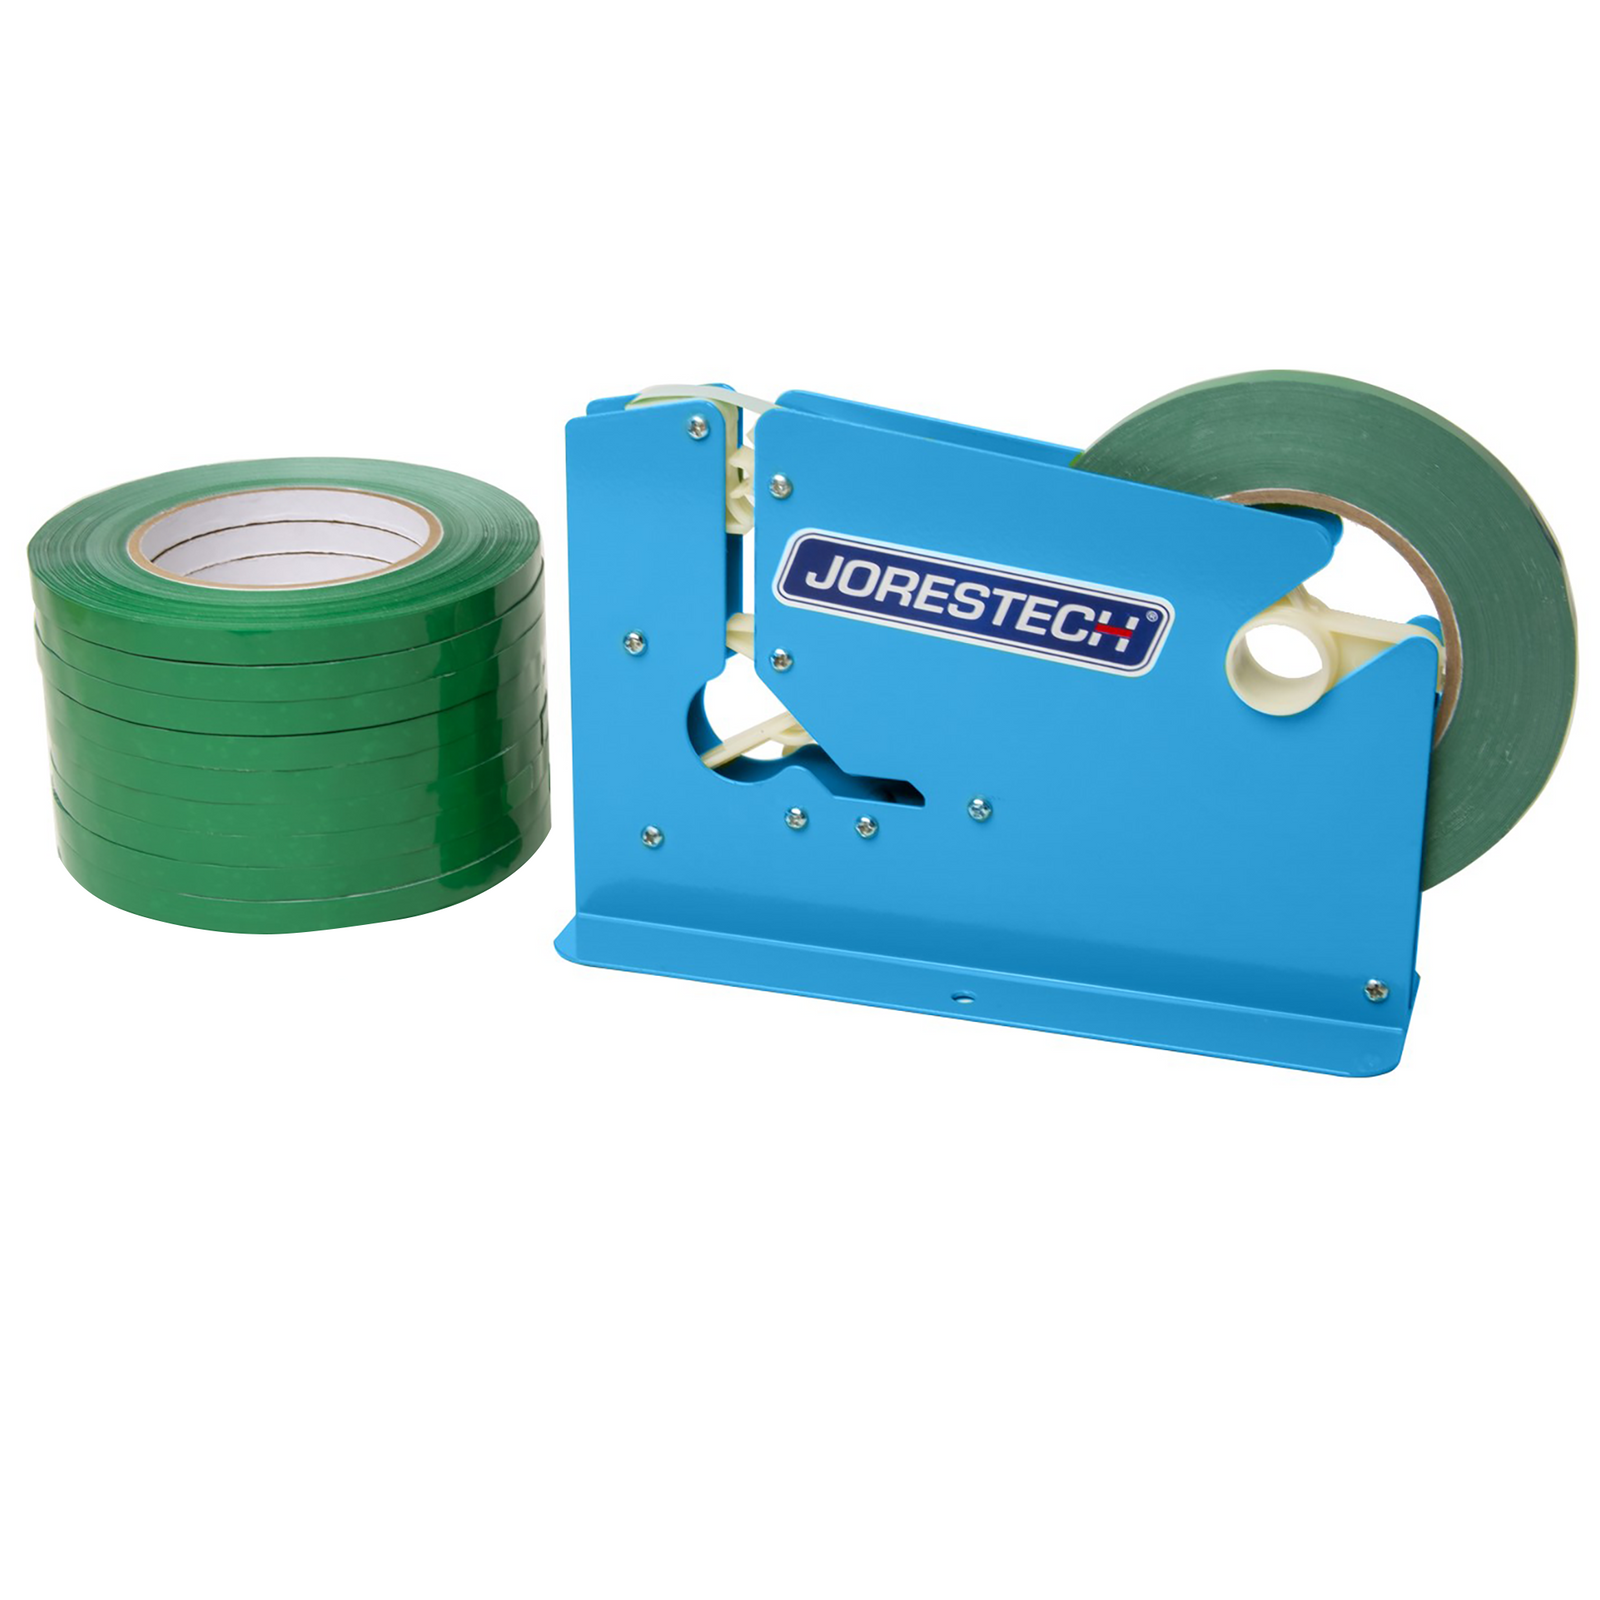 A JORES TECHNOLOGIES® powder coated blue manual bag taper with 10 green self adhesive tape rolls